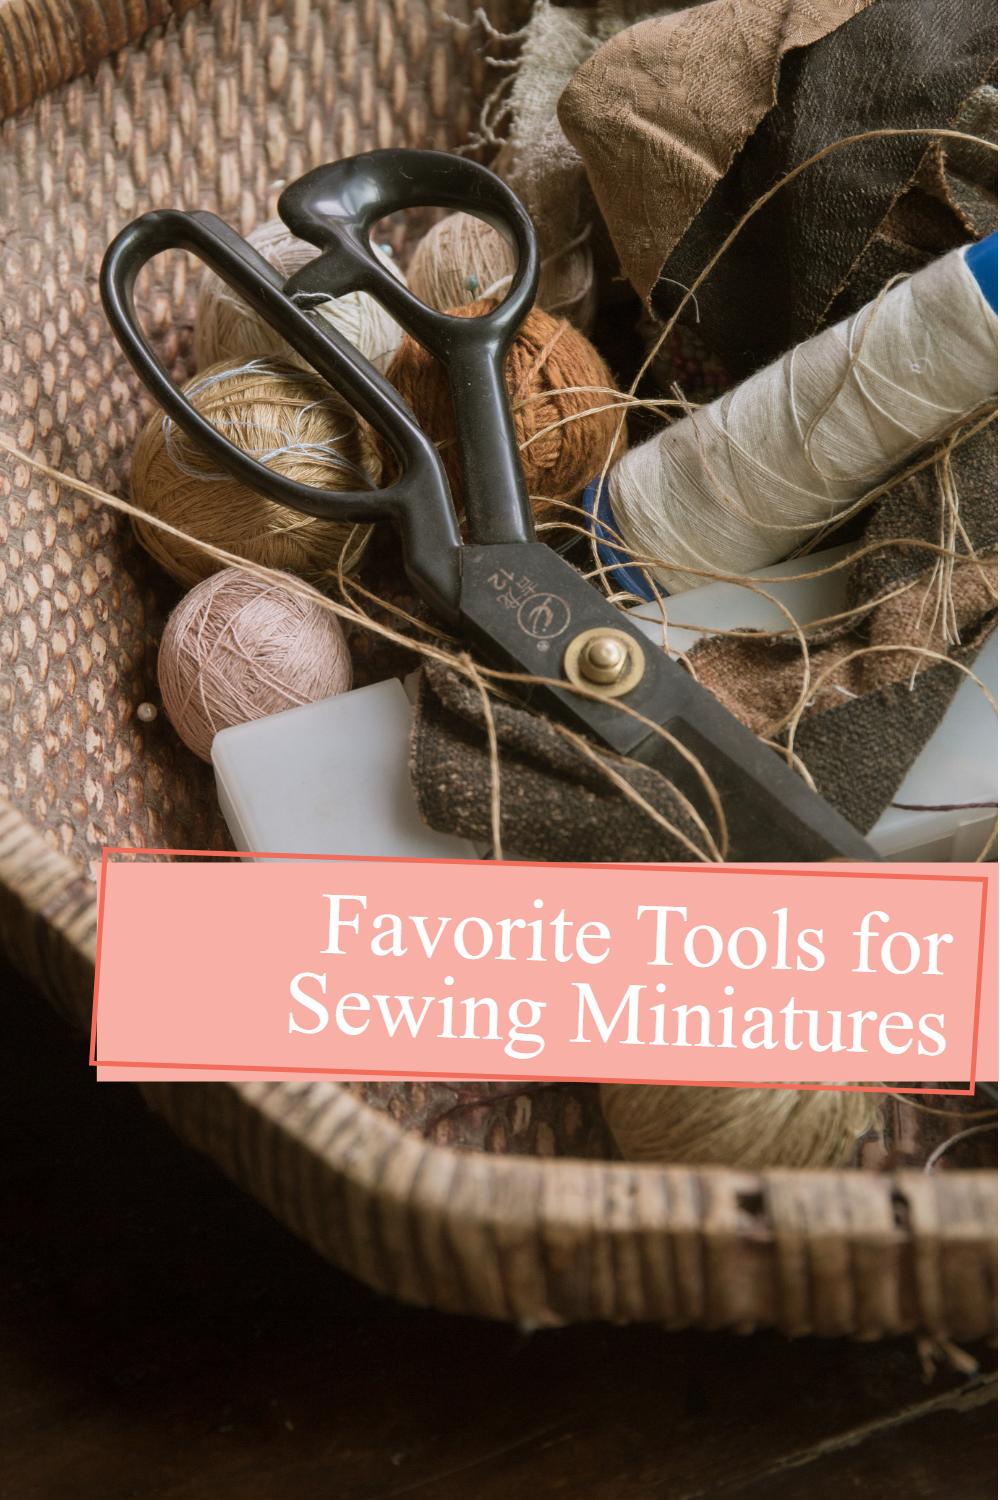 basket of sewing tools and a pink banner with the words Favorite Tools for Sewing Miniatures